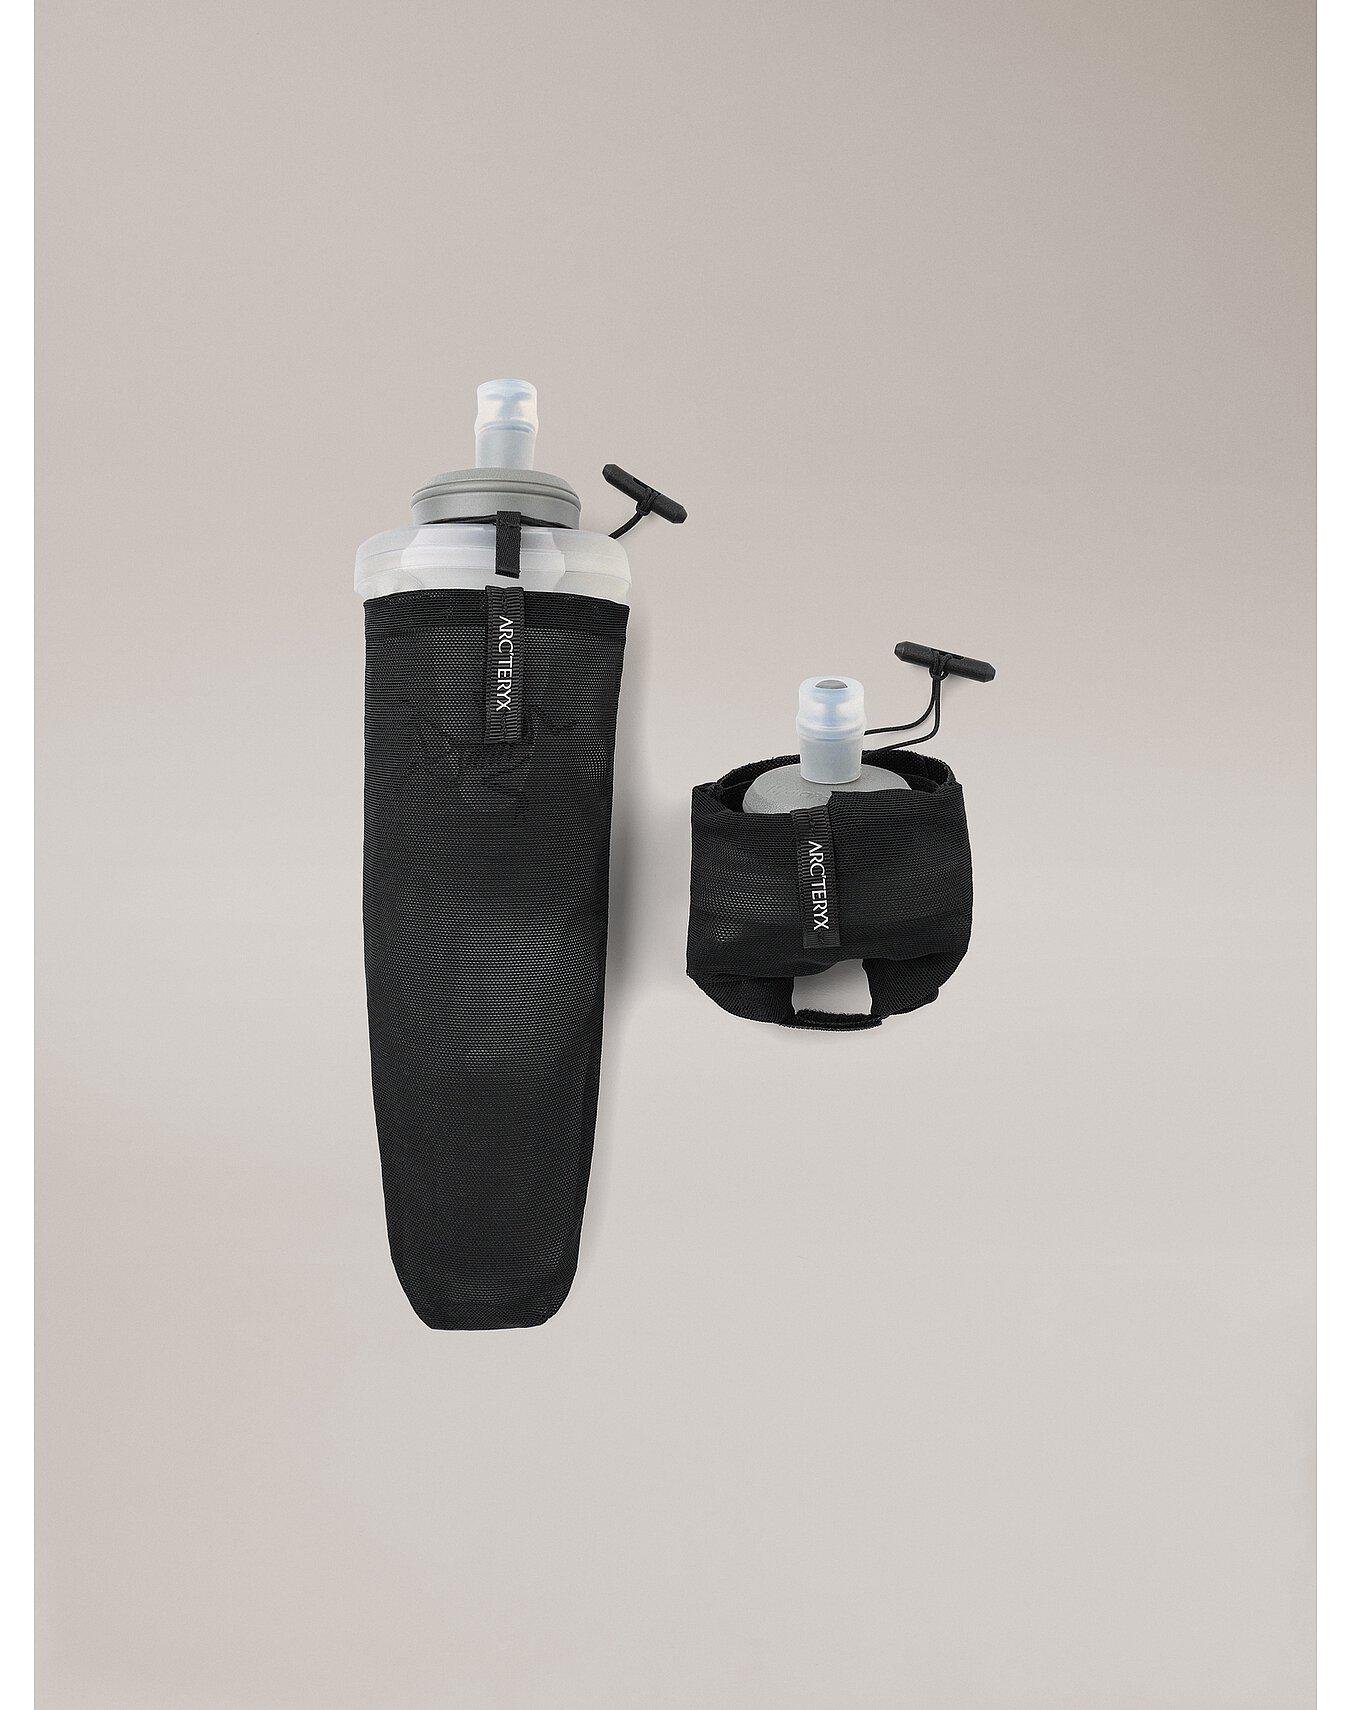 Della Flask Holder Pack Accessory by ARC'TERYX